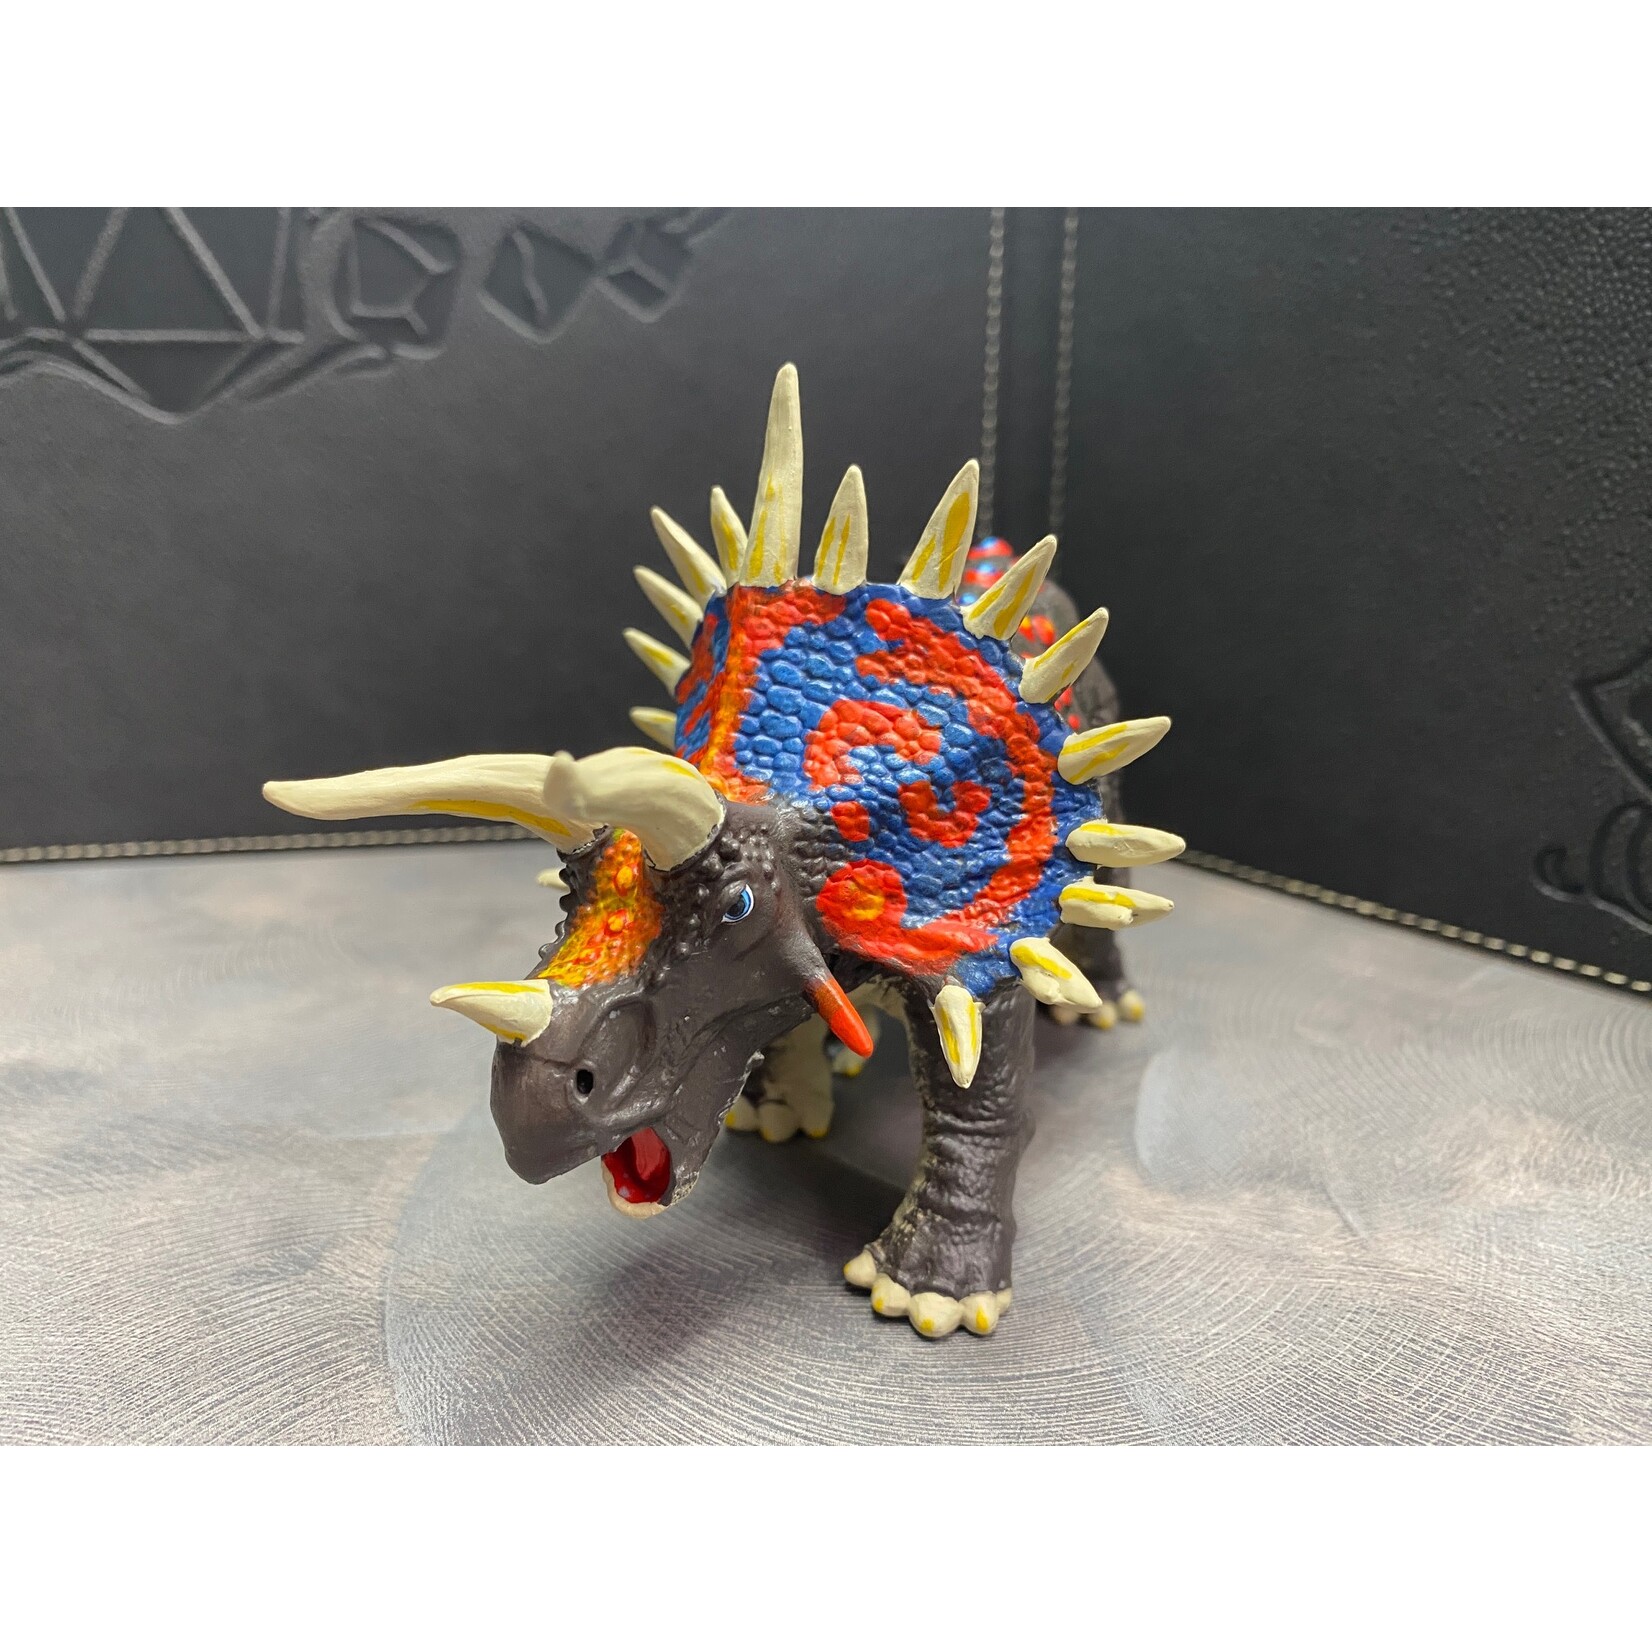 Painting Workshop: 5/25/24, 7 pm: Paint 'n Take a Triceratops